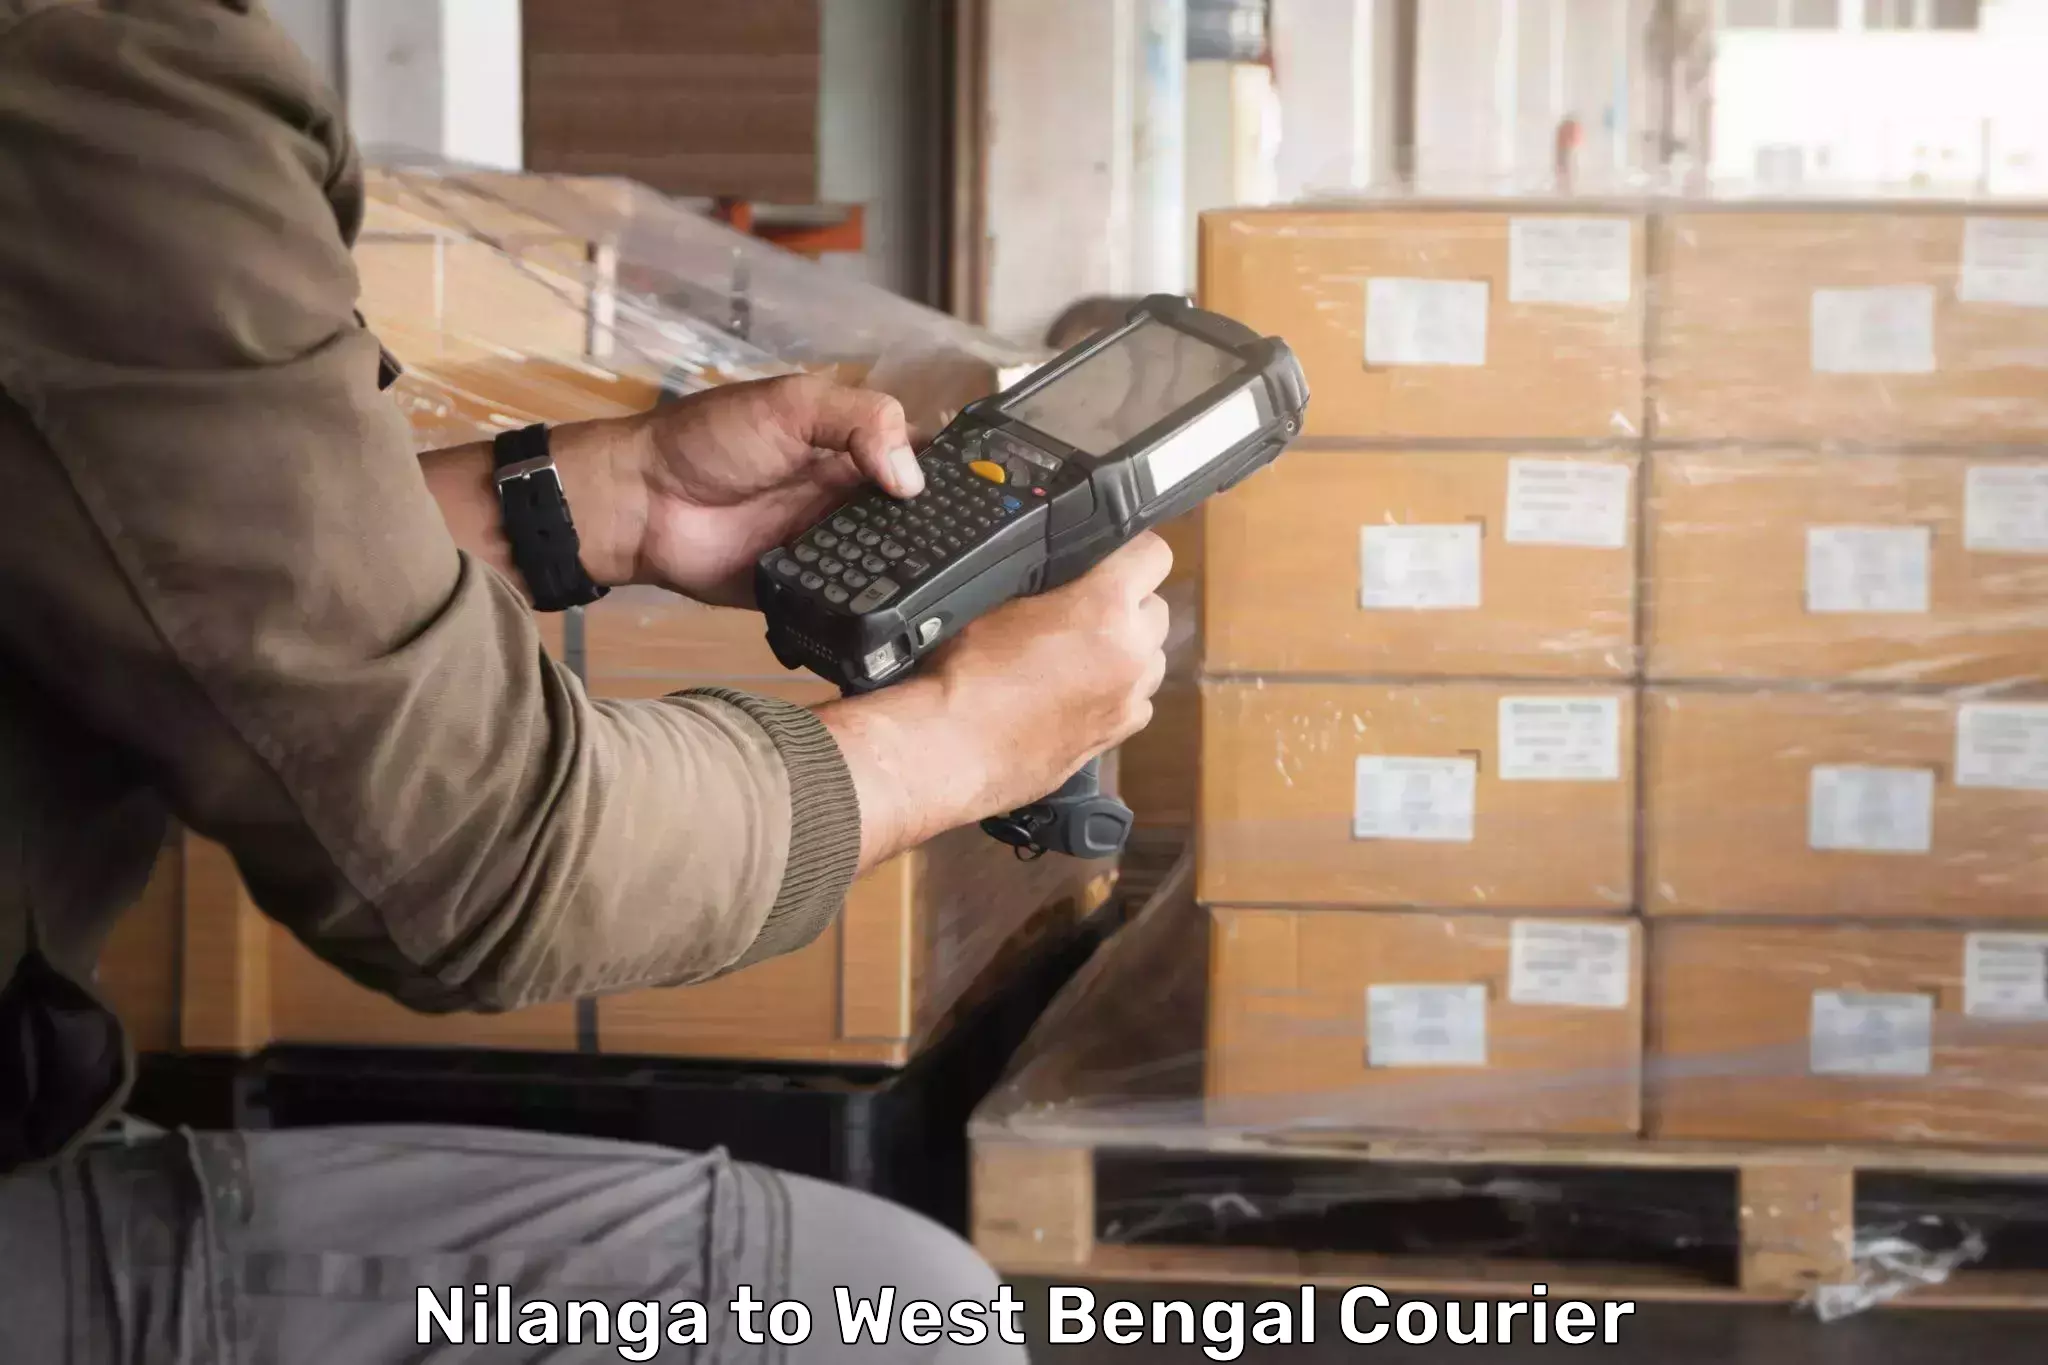 Nationwide delivery network Nilanga to West Bengal